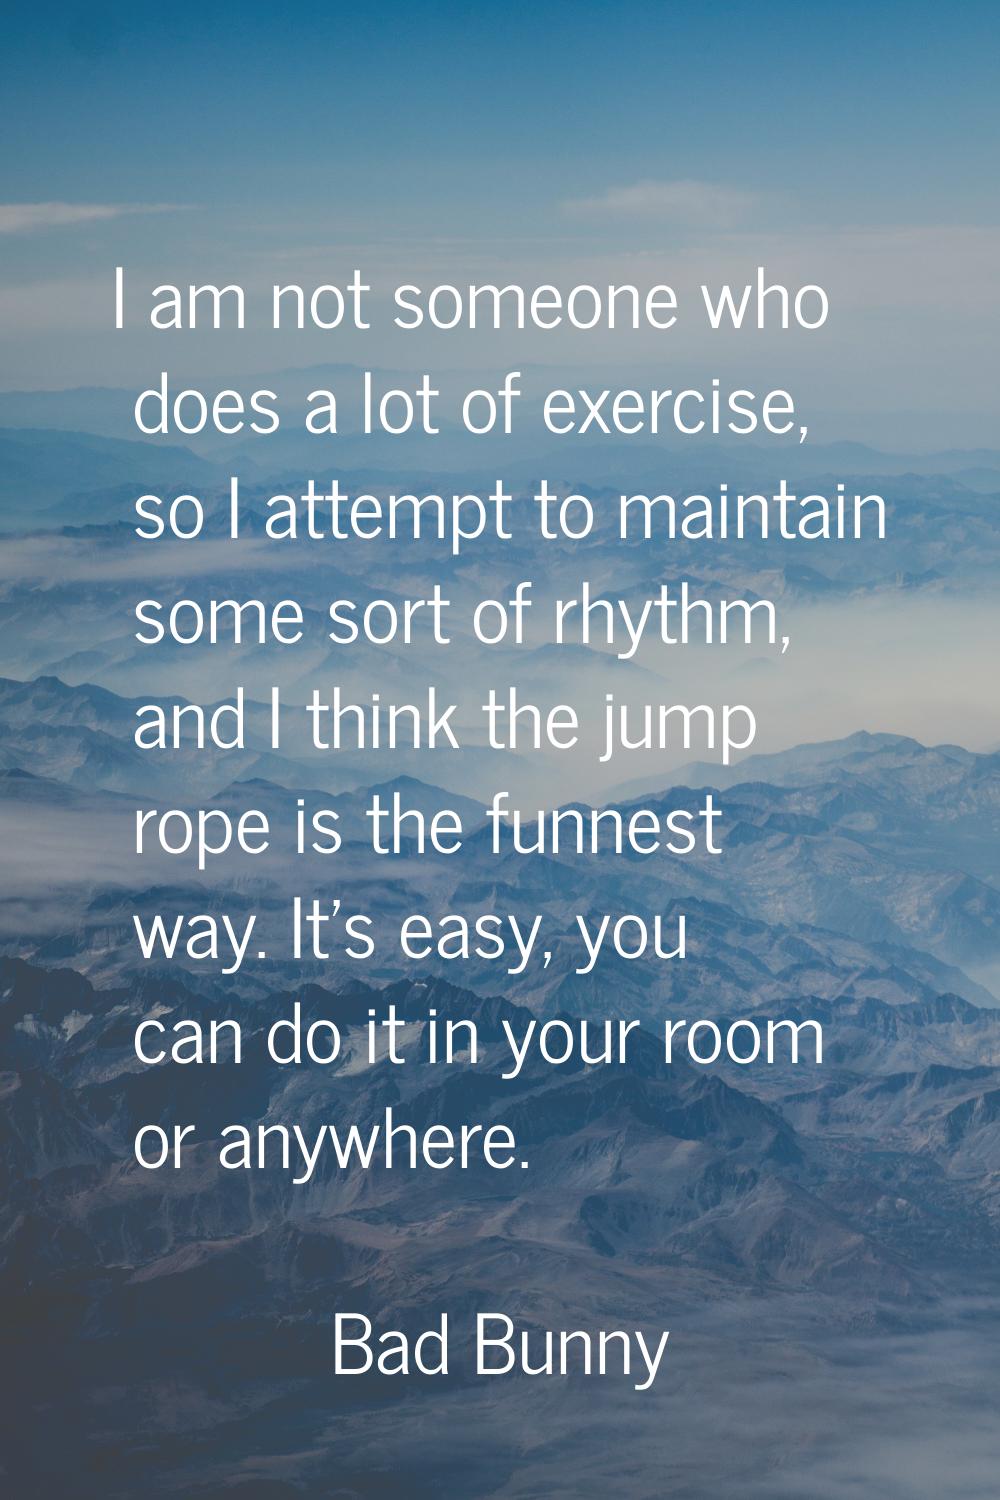 I am not someone who does a lot of exercise, so I attempt to maintain some sort of rhythm, and I th